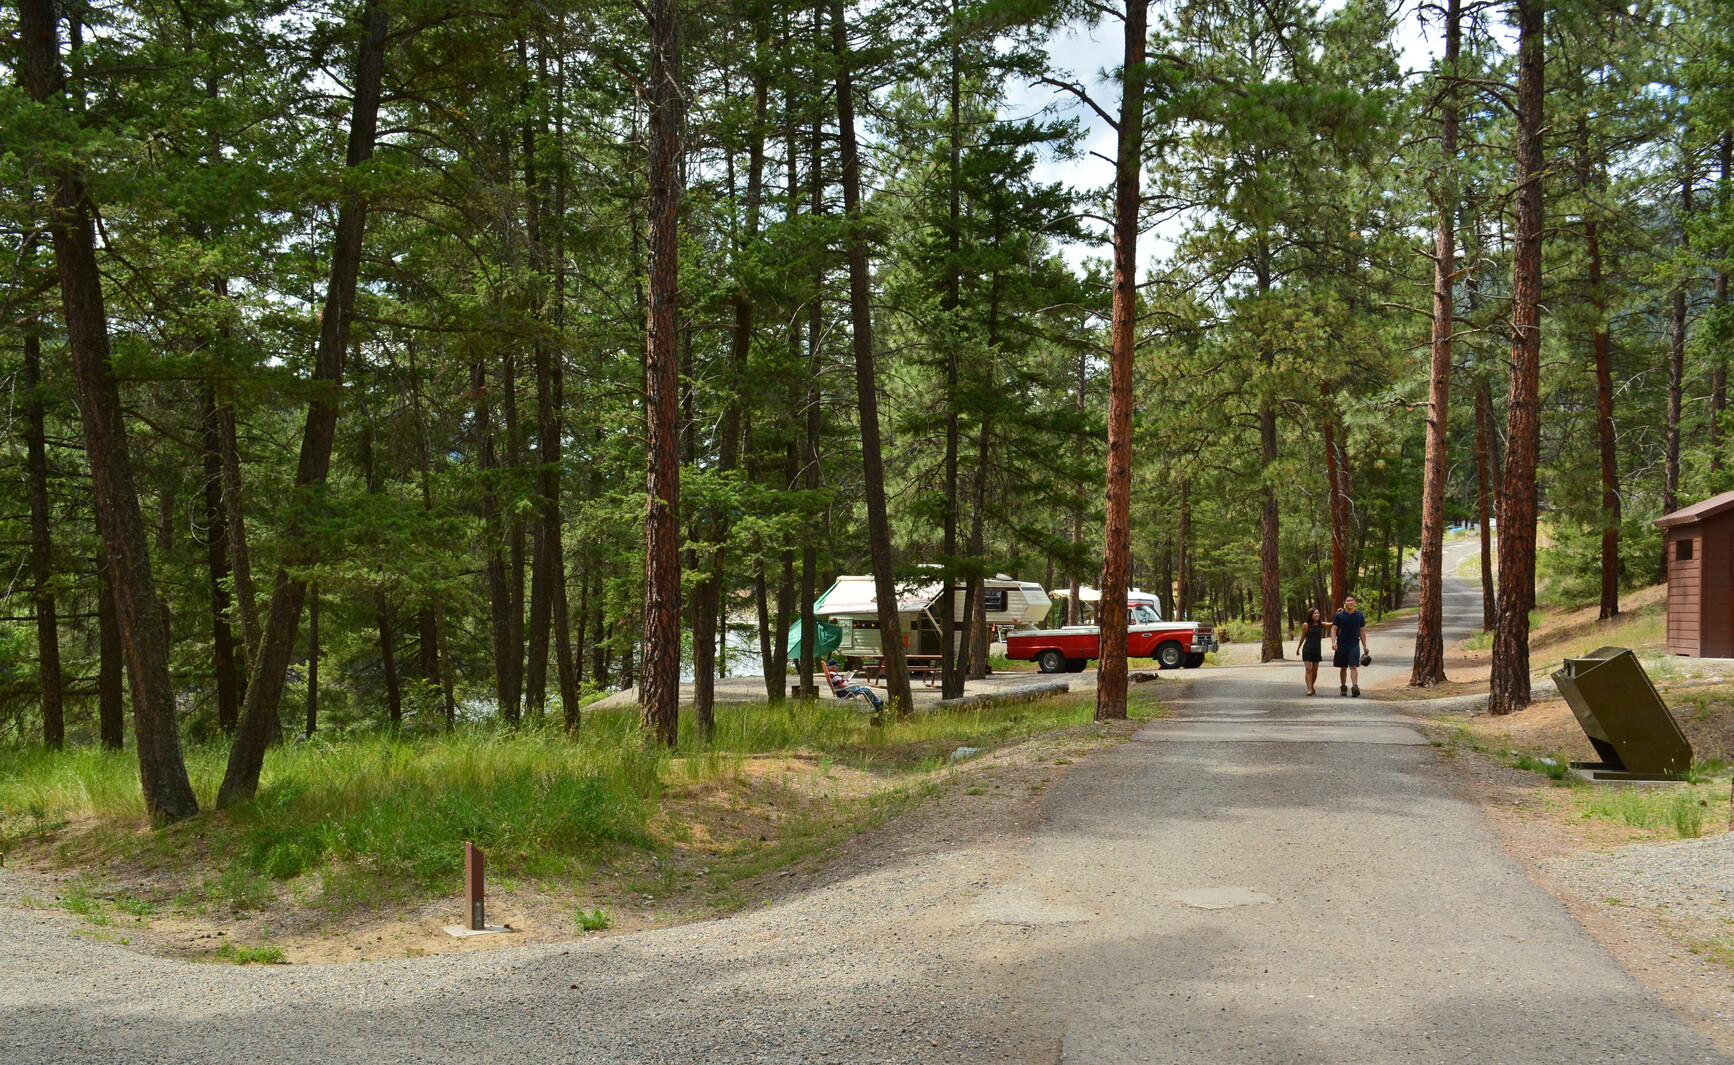 Two park visitors are walking along a road. A campsite with a truck and trailer are on the left. A park visitor is sitting on a chair and reading a book in the campsite. A garbage bin and outhouse are on the right. Trees and grass scattered throughout.